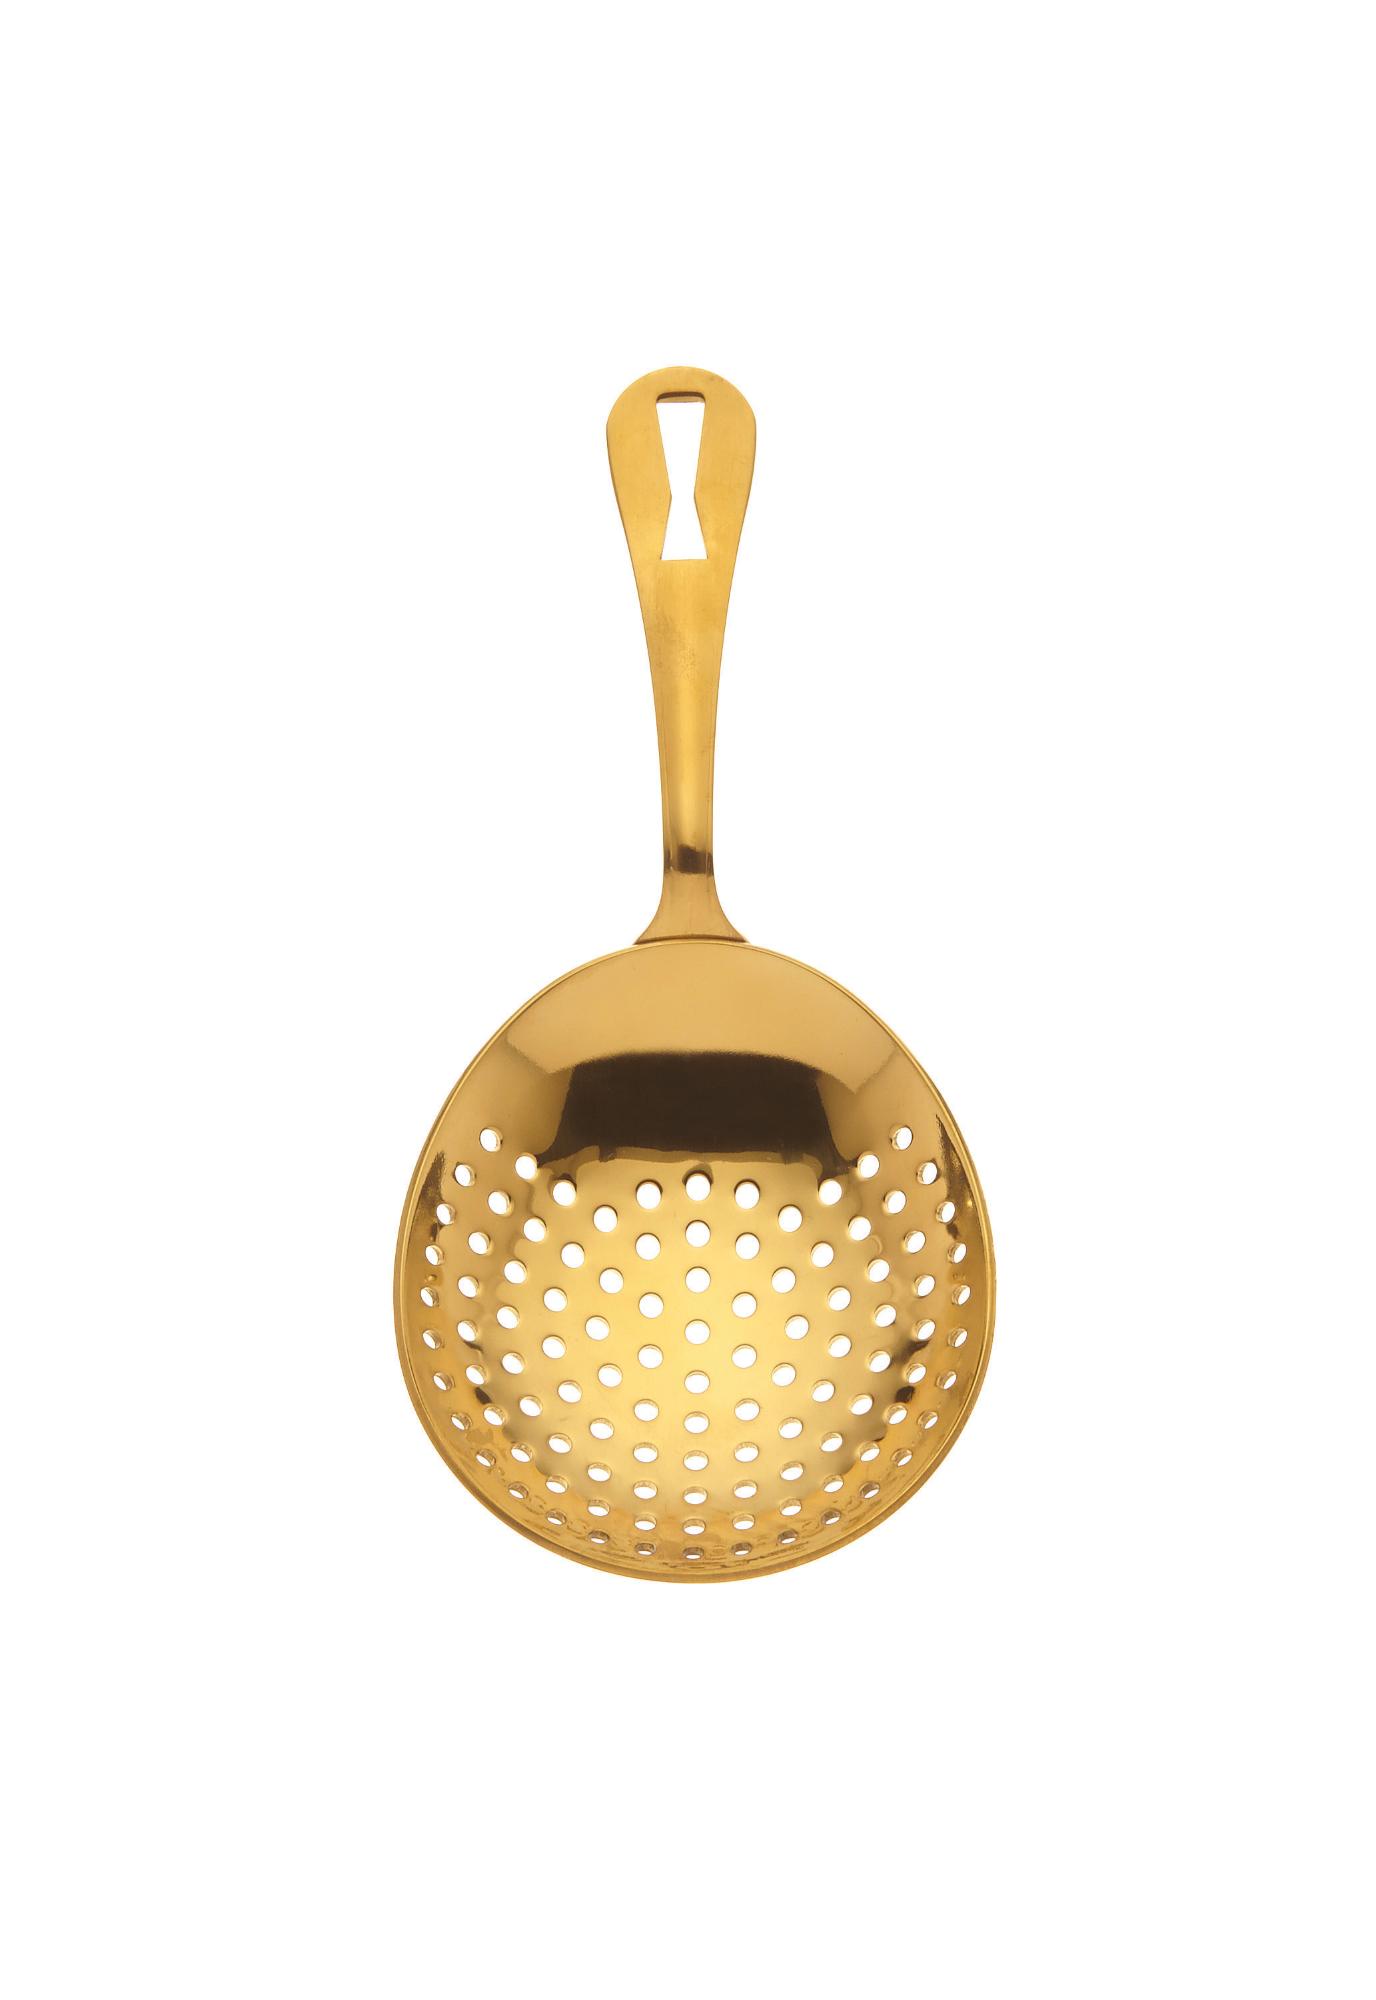 Julep Strainer, Gold plated, 165mm